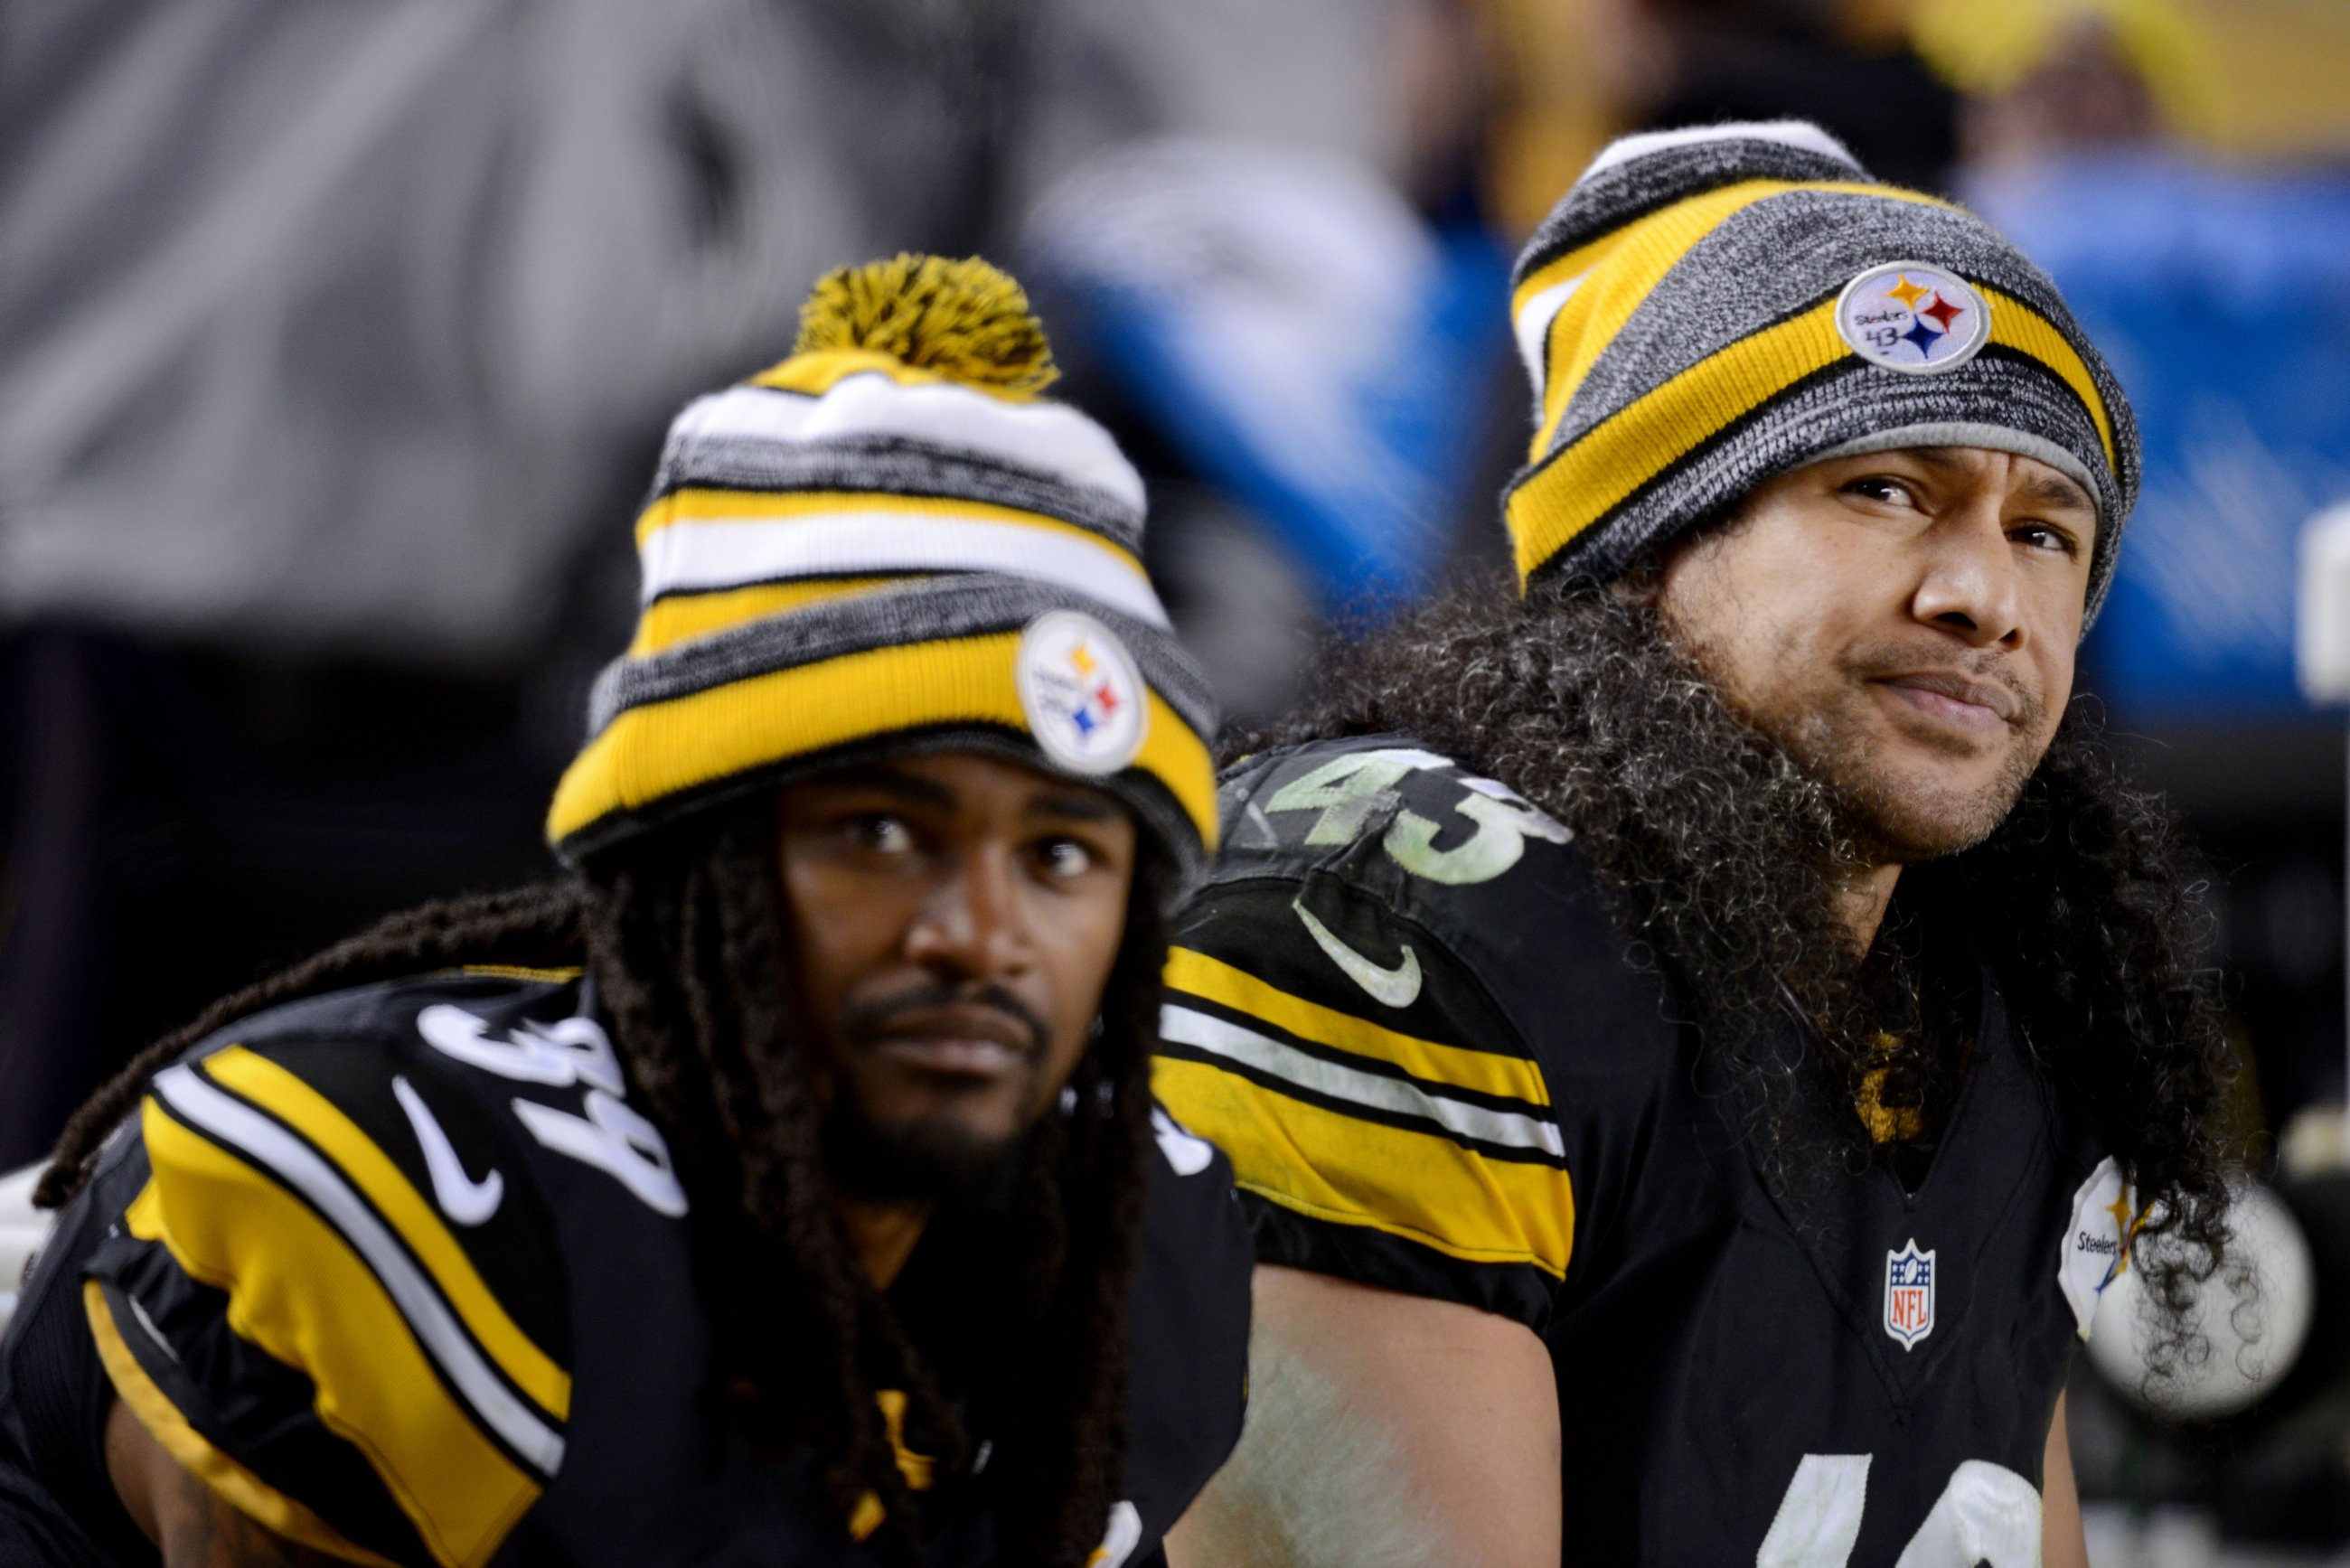 Steelers vs. Ravens: Photos of fans and game action at Heinz Field | Pittsburgh Post ...